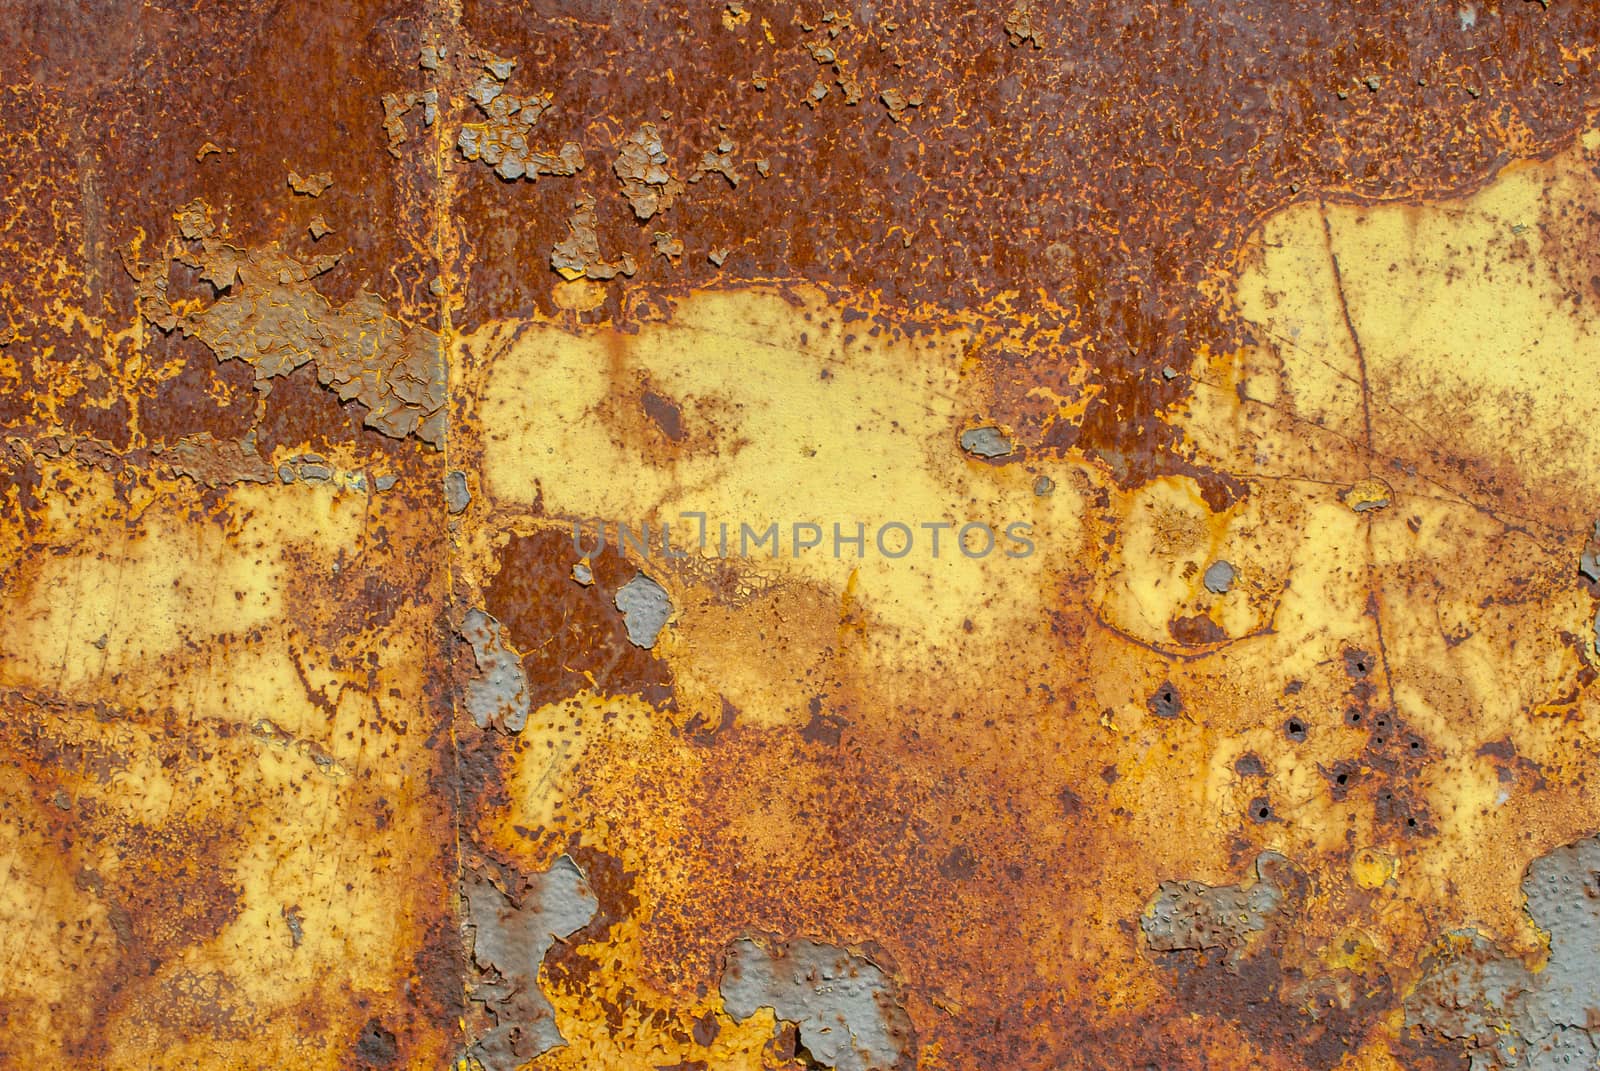 rusty iron surface covered with old chipped yellow color paint, which has long been influenced by different climatic conditions